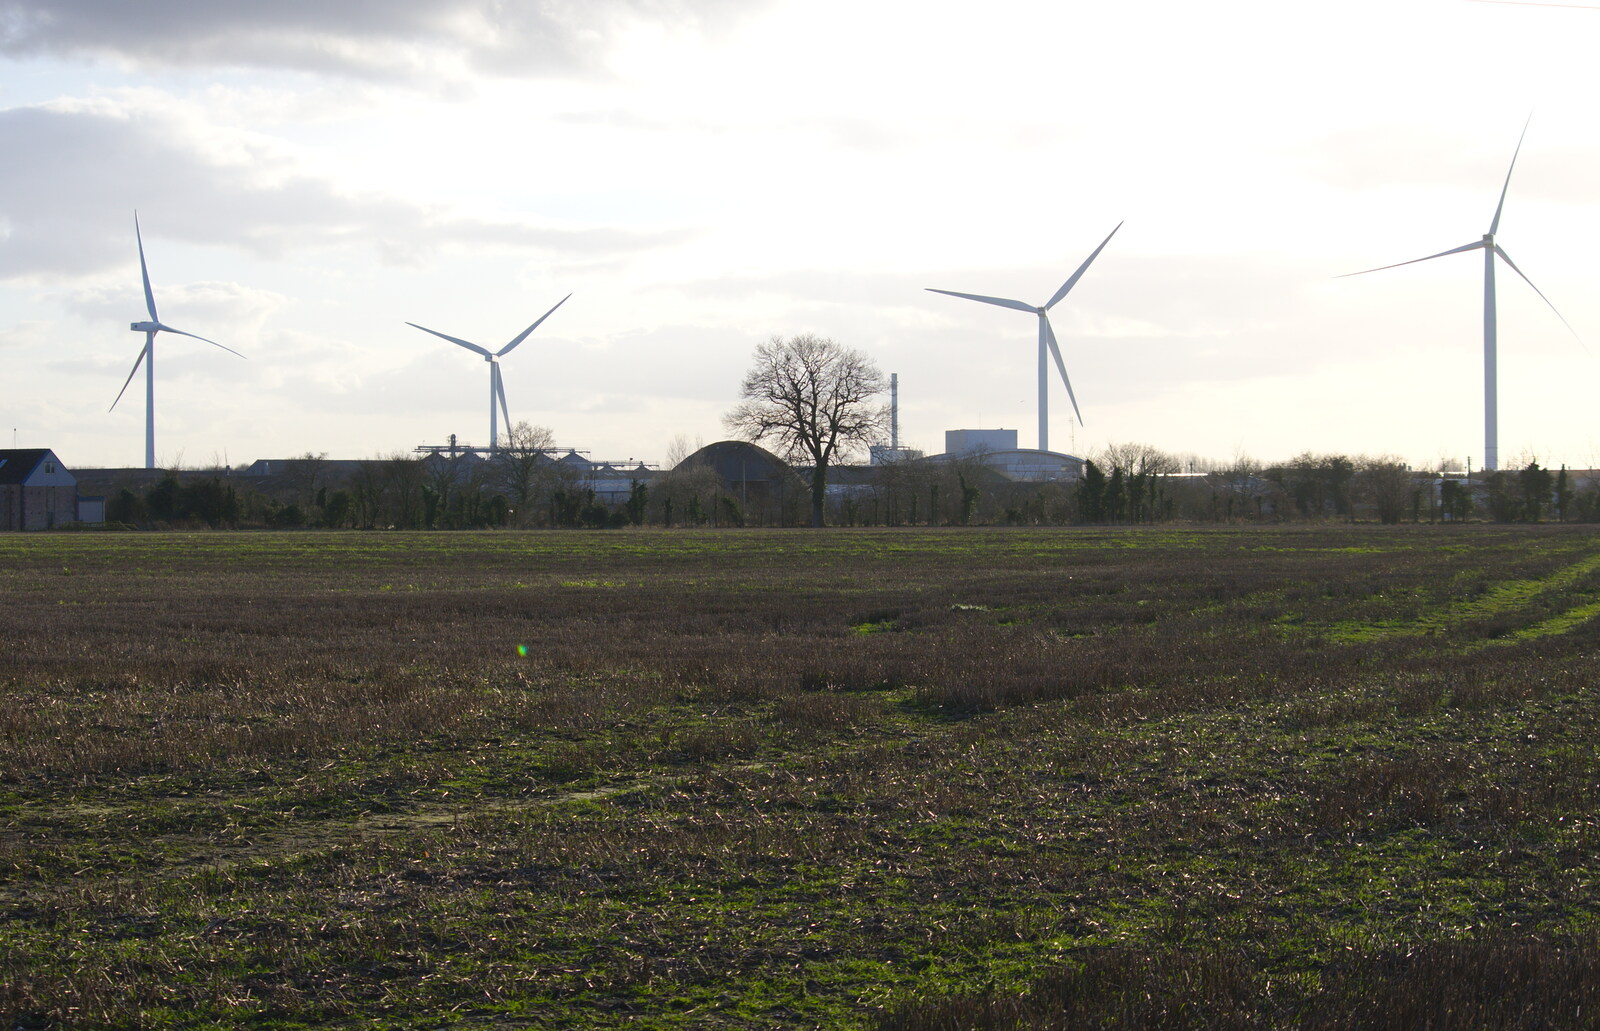 The four wind turbines on the airfield from A Trip to see Chinner, Brome, Suffolk - 22nd April 2014